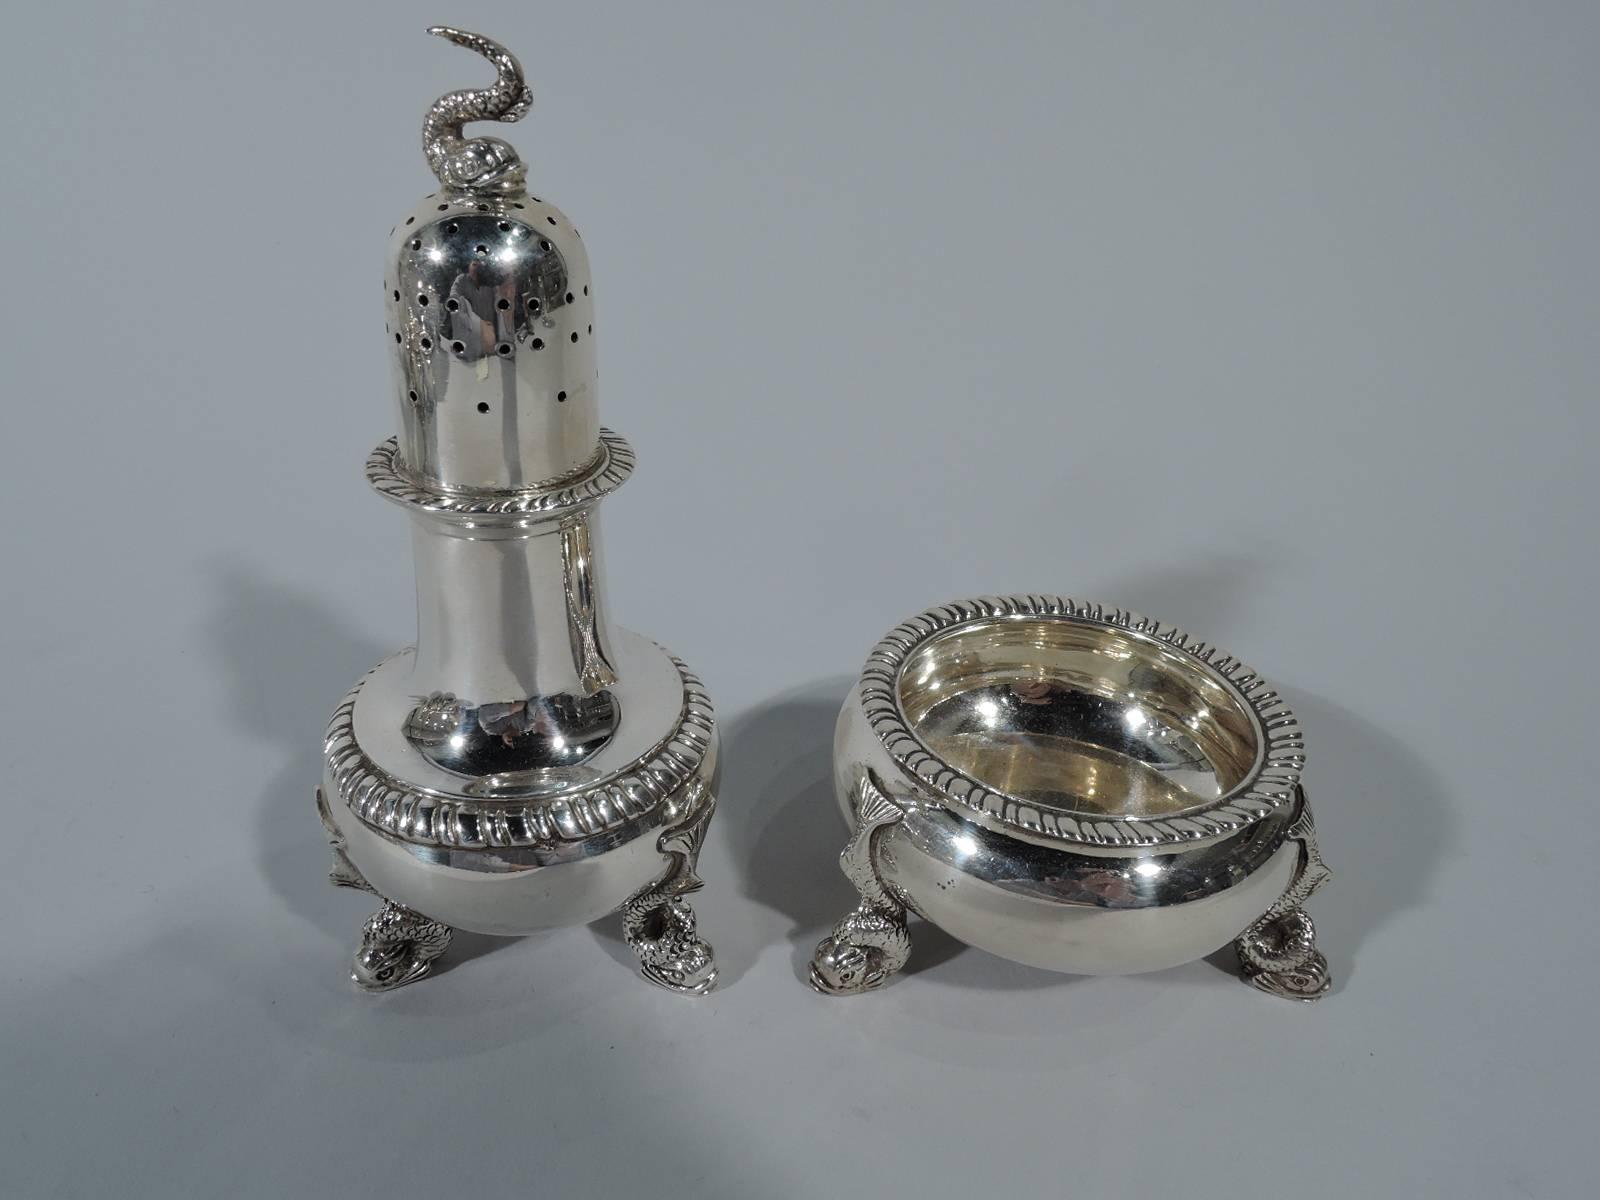 Neoclassical Revival Set of Four Pairs of Antique Neoclassical Sterling Silver Salts & Peppers